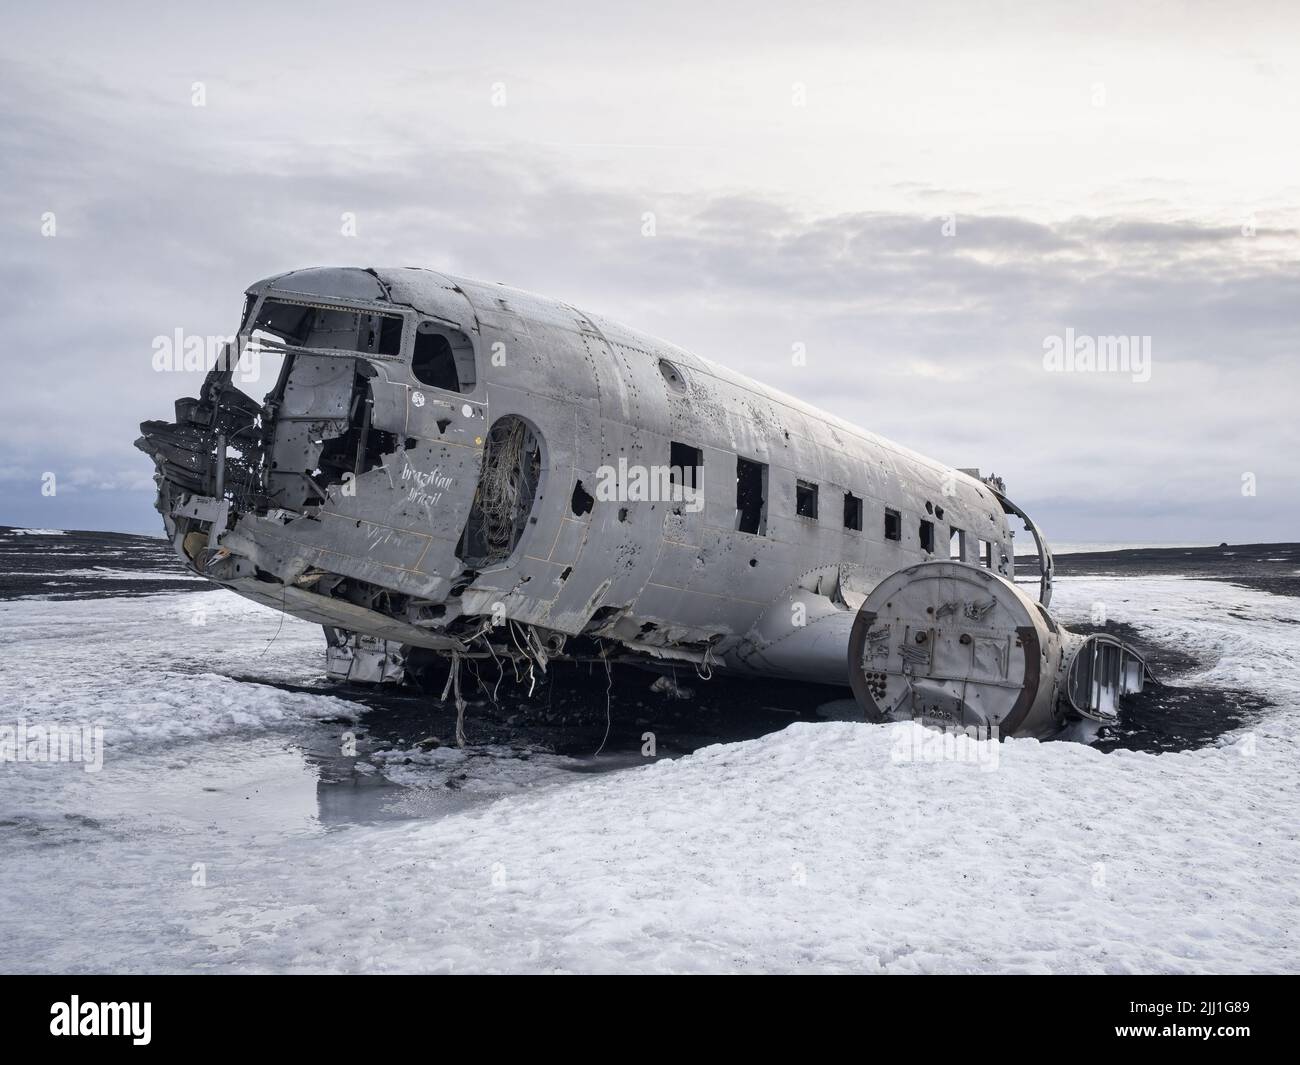 A wrecked and abandoned Douglas DC-3 airliner on the beach at Sólheimasandur, Iceland. Stock Photo